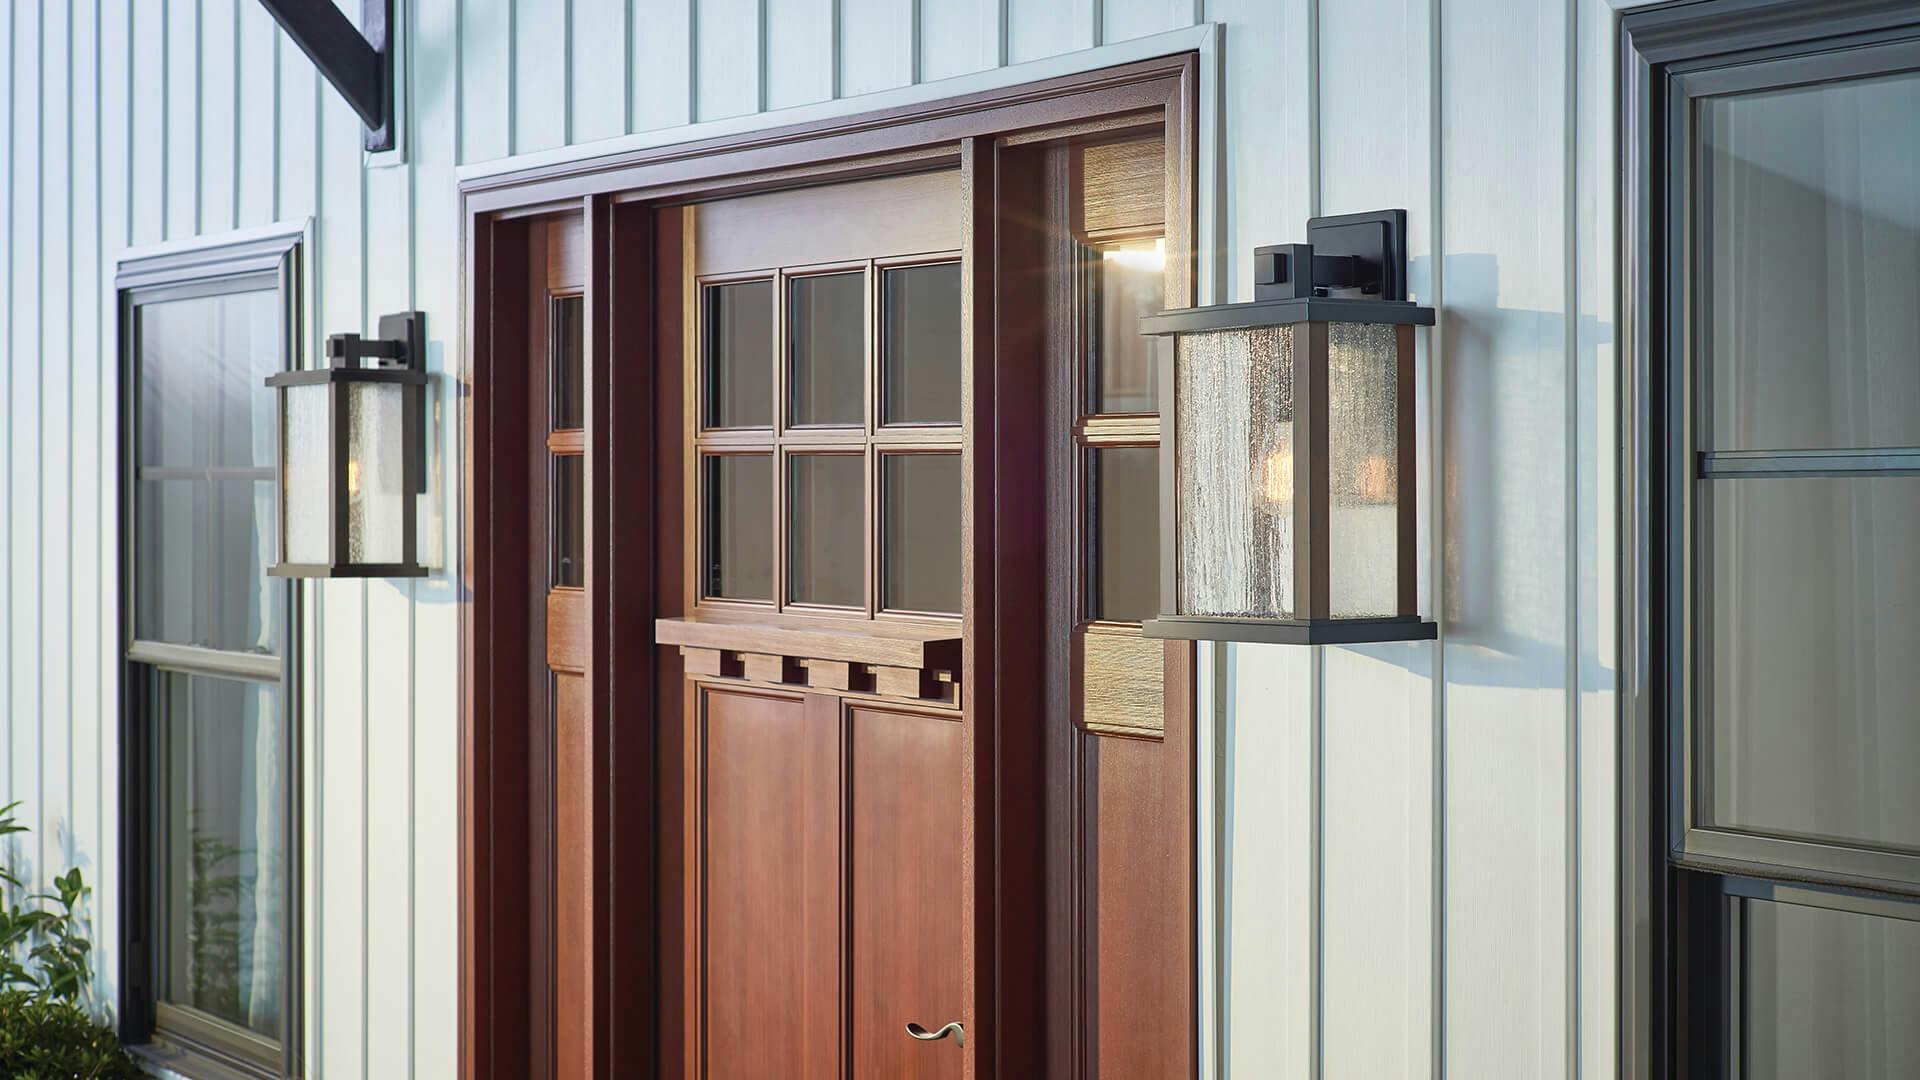 Outdoor view of an entry way featuring two marimount sconces on either side of the front door